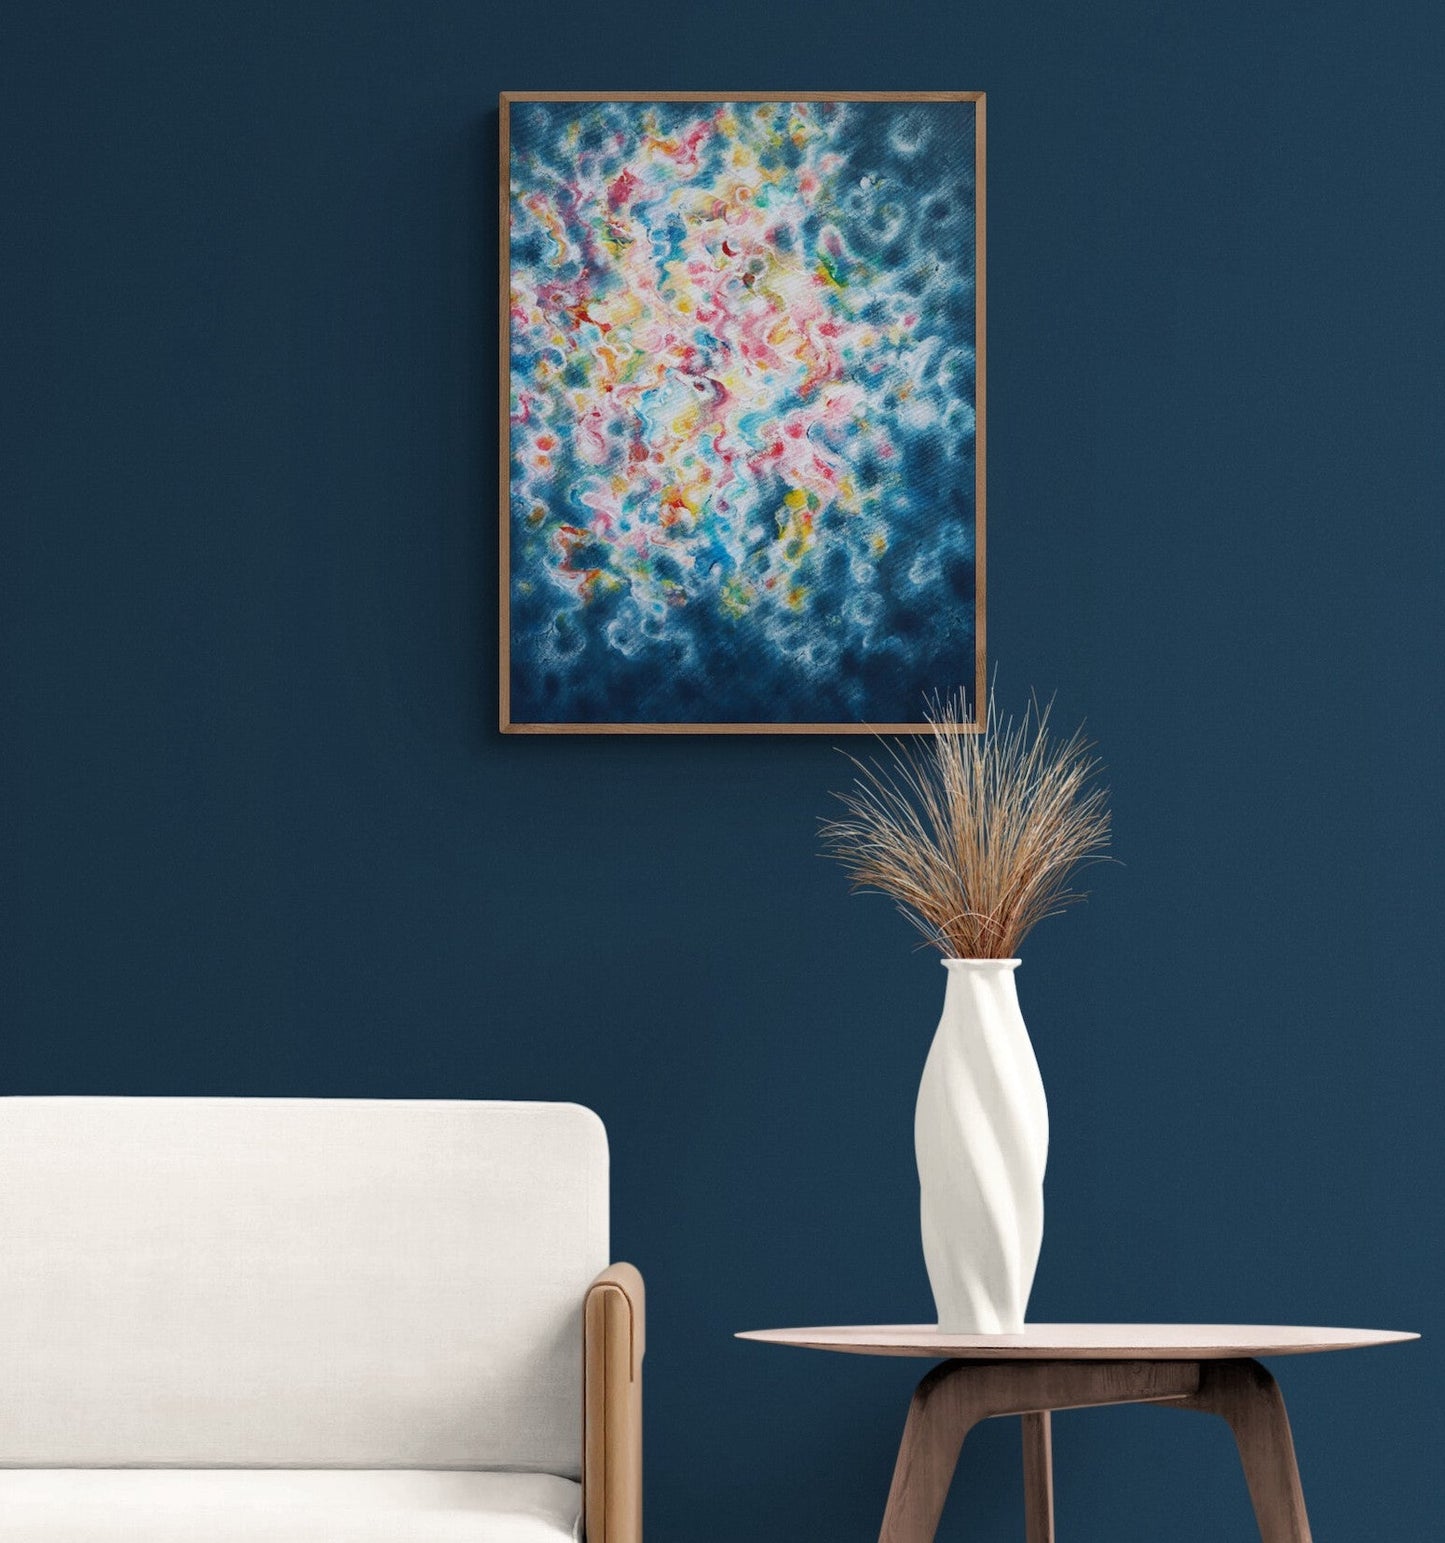 Striking abstract art for the home